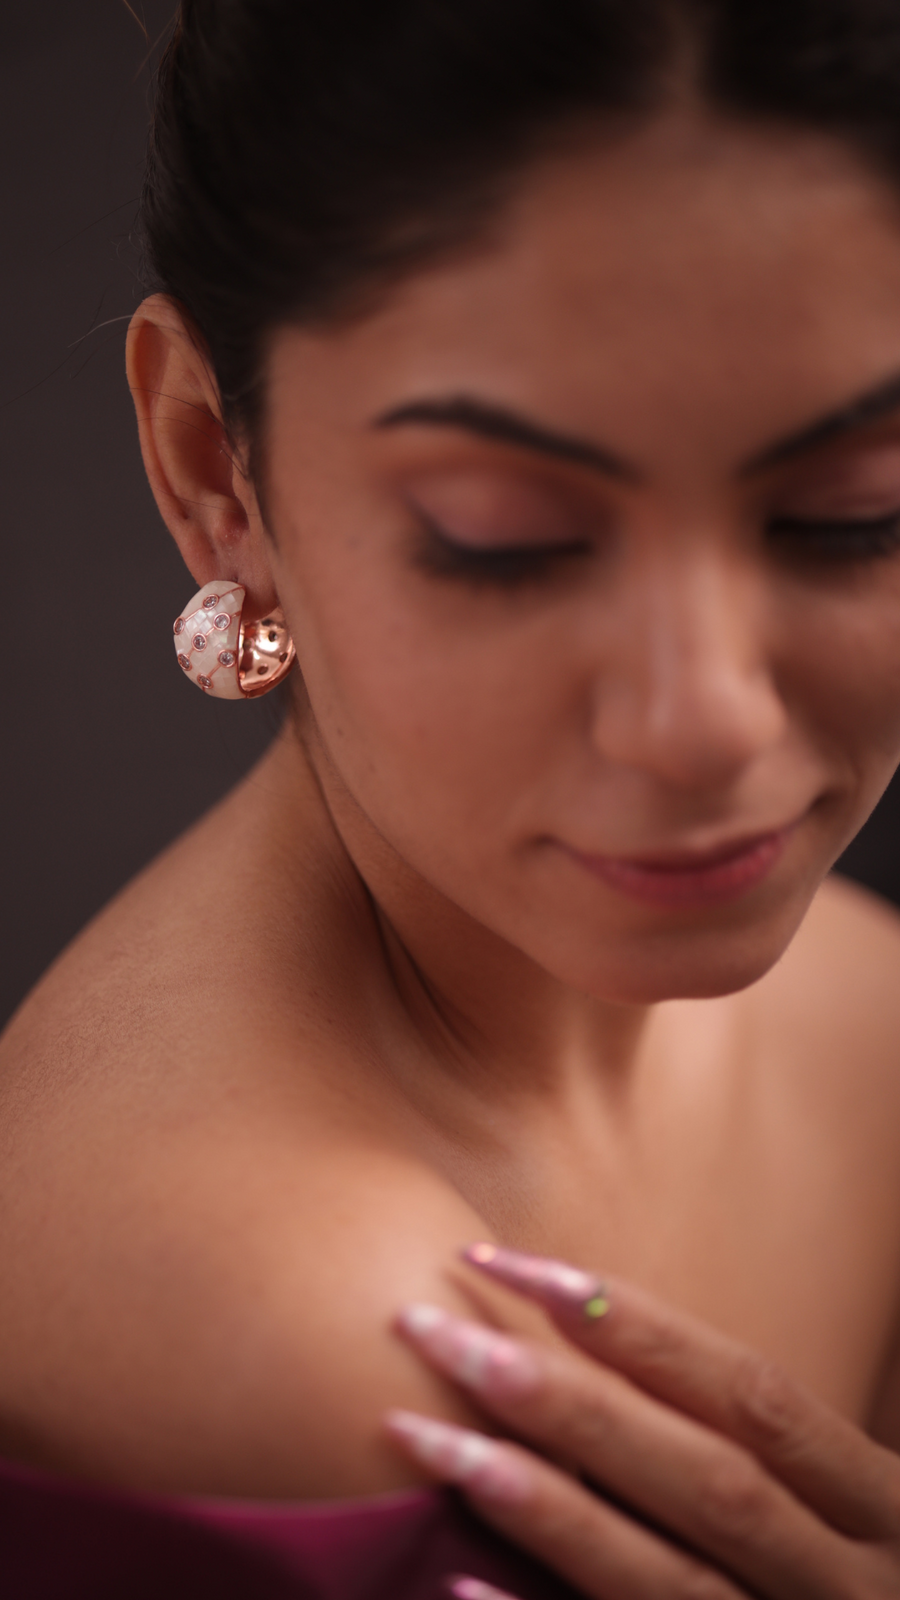 Lady in pink attire with showcasing the adrisya earrings.